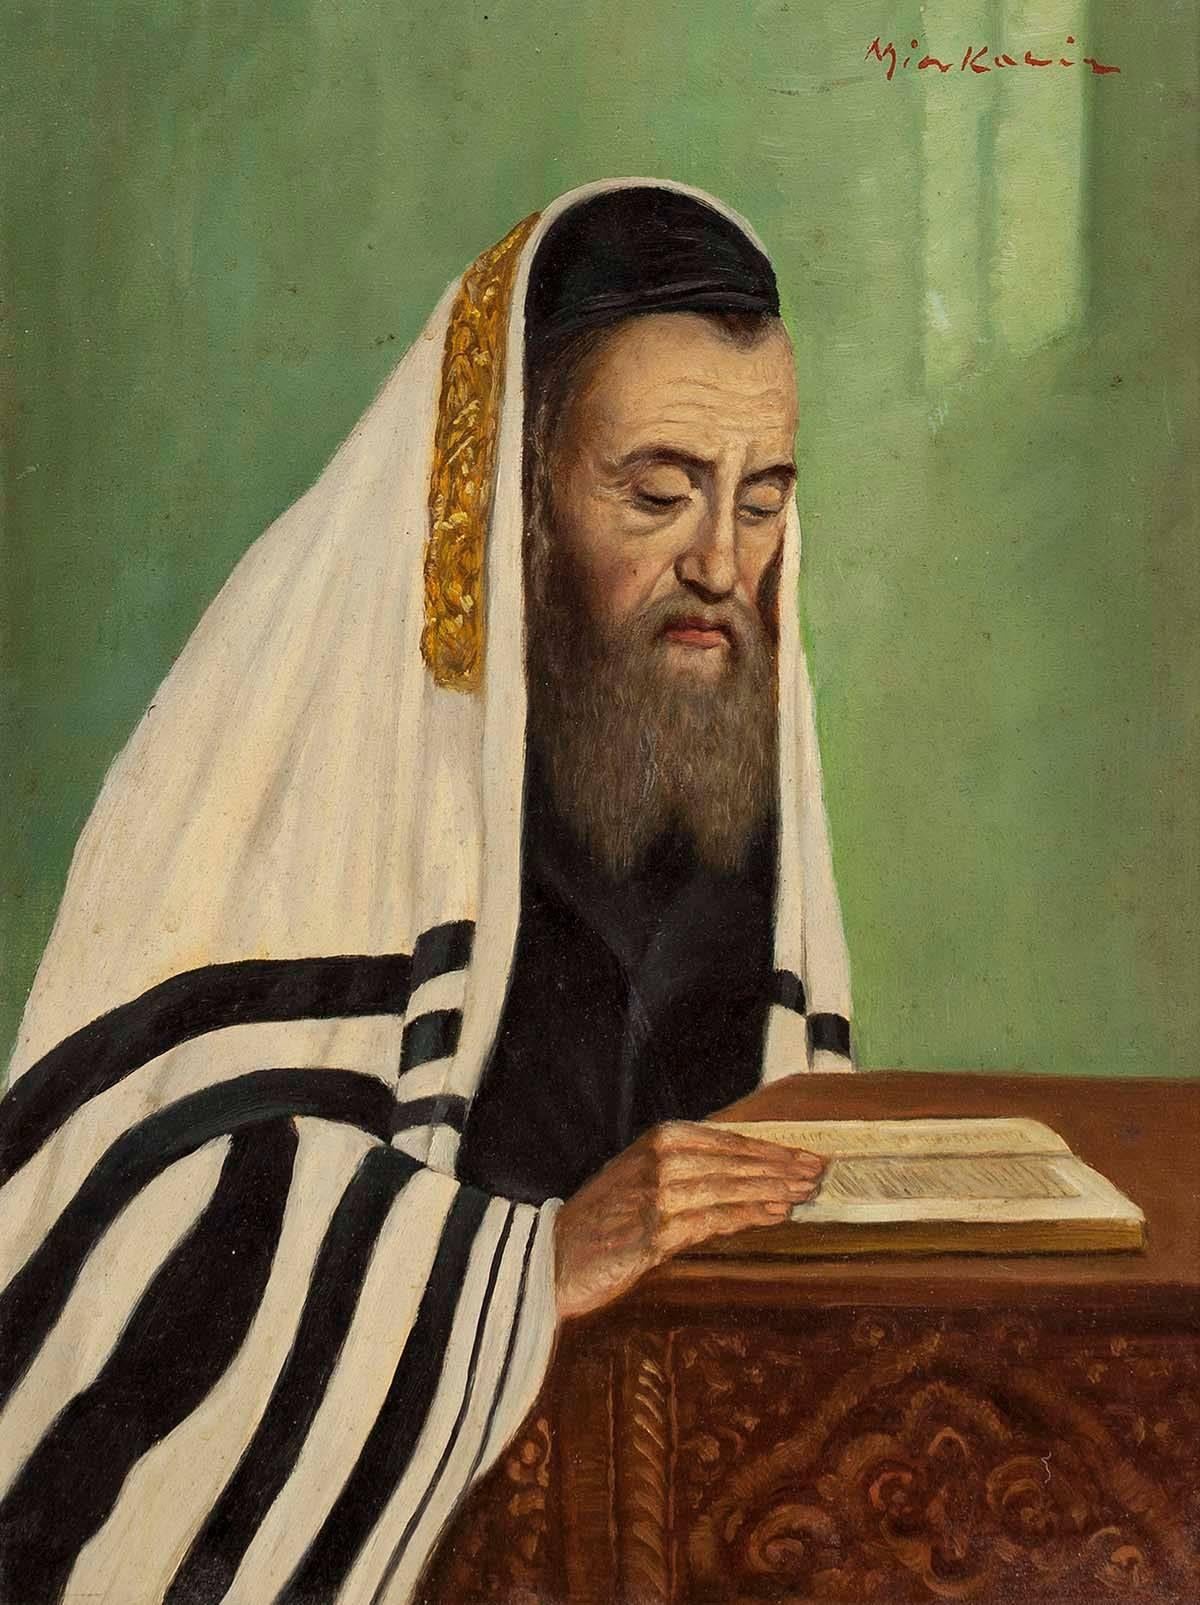 Rabbi in Prayer - Painting by Unknown